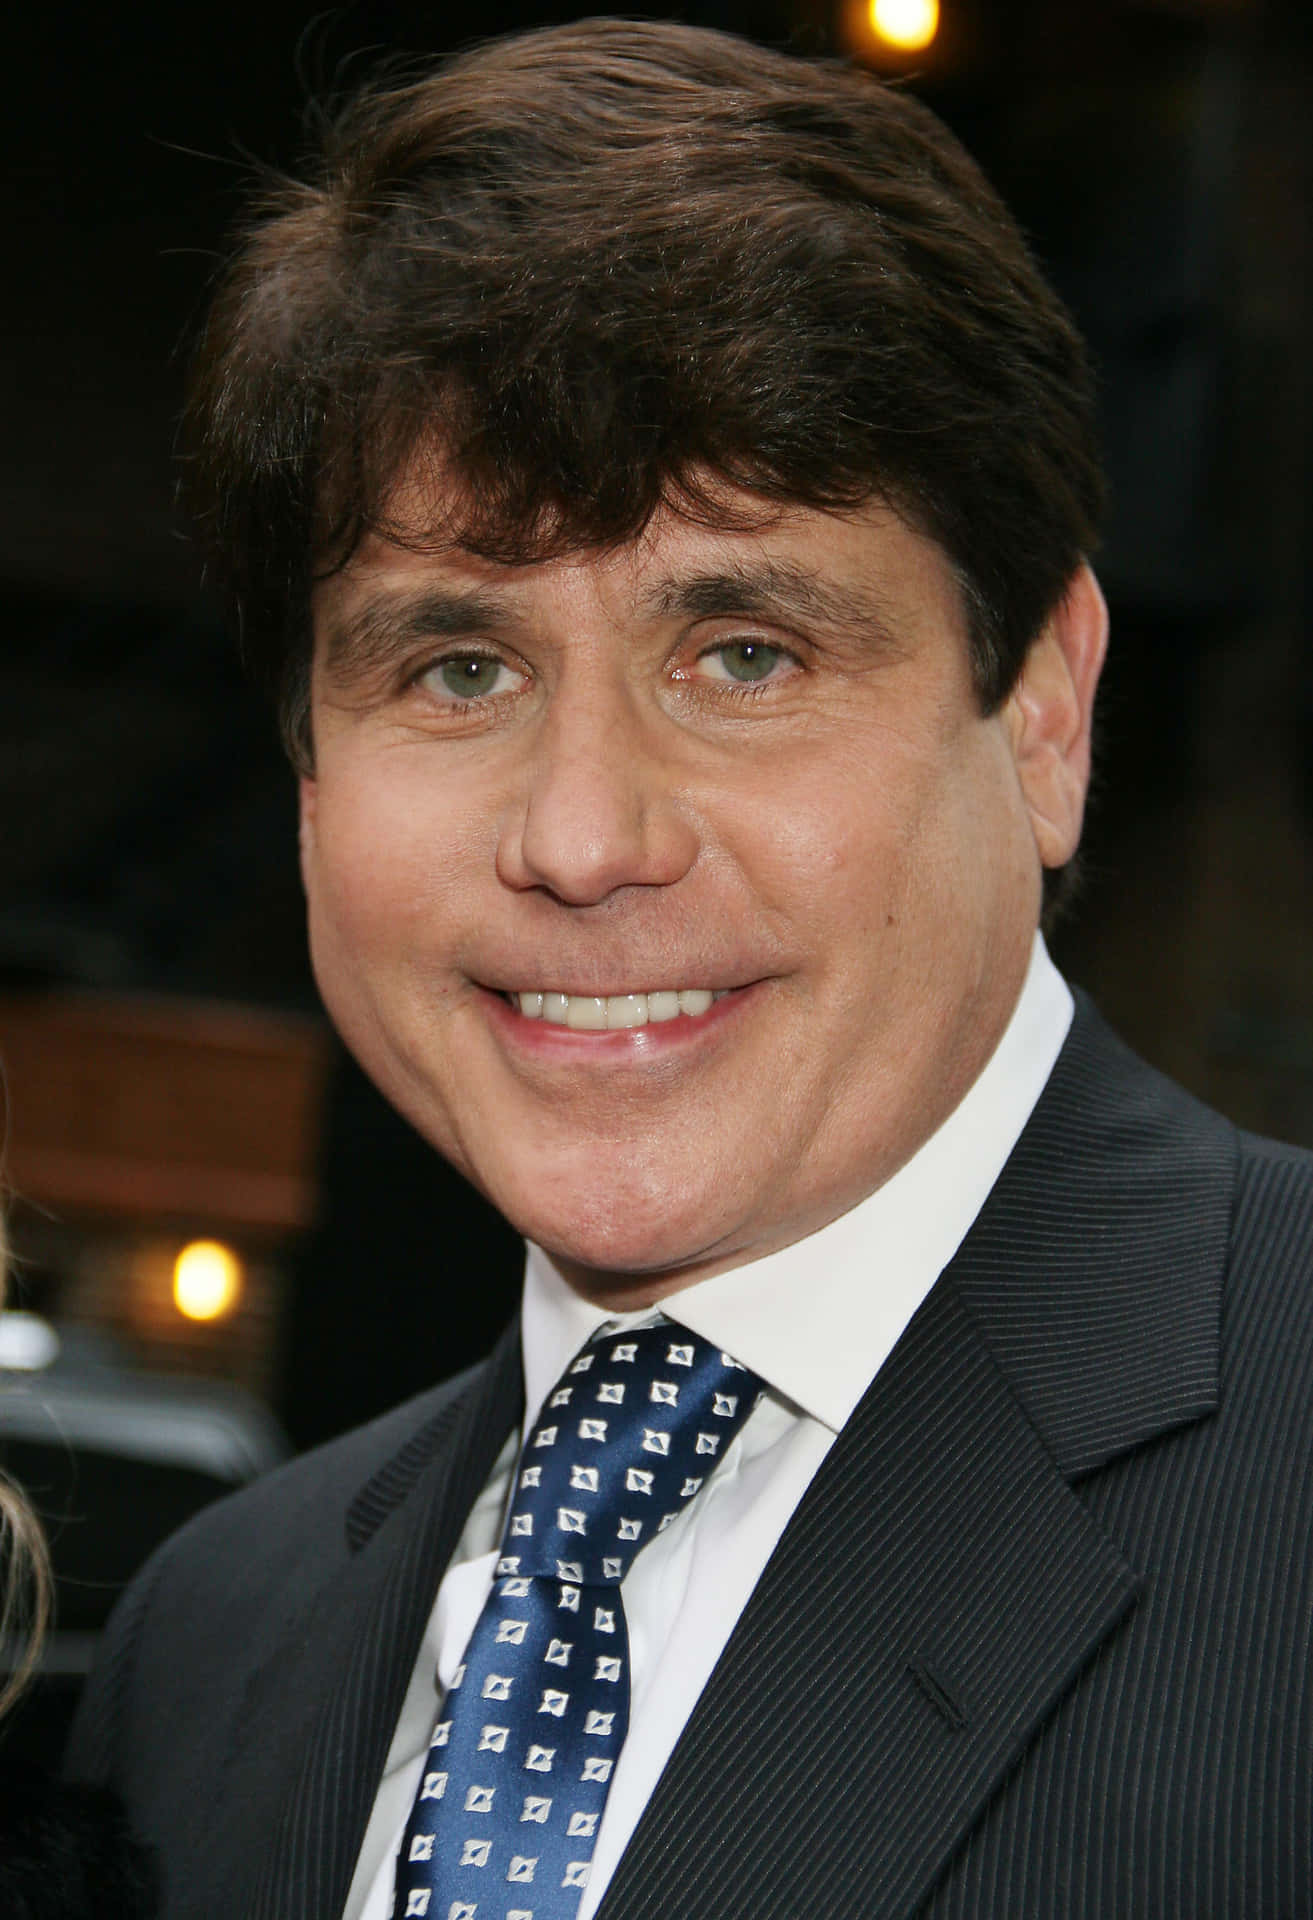 Rod Blagojevich Smiling in a Suit Wallpaper